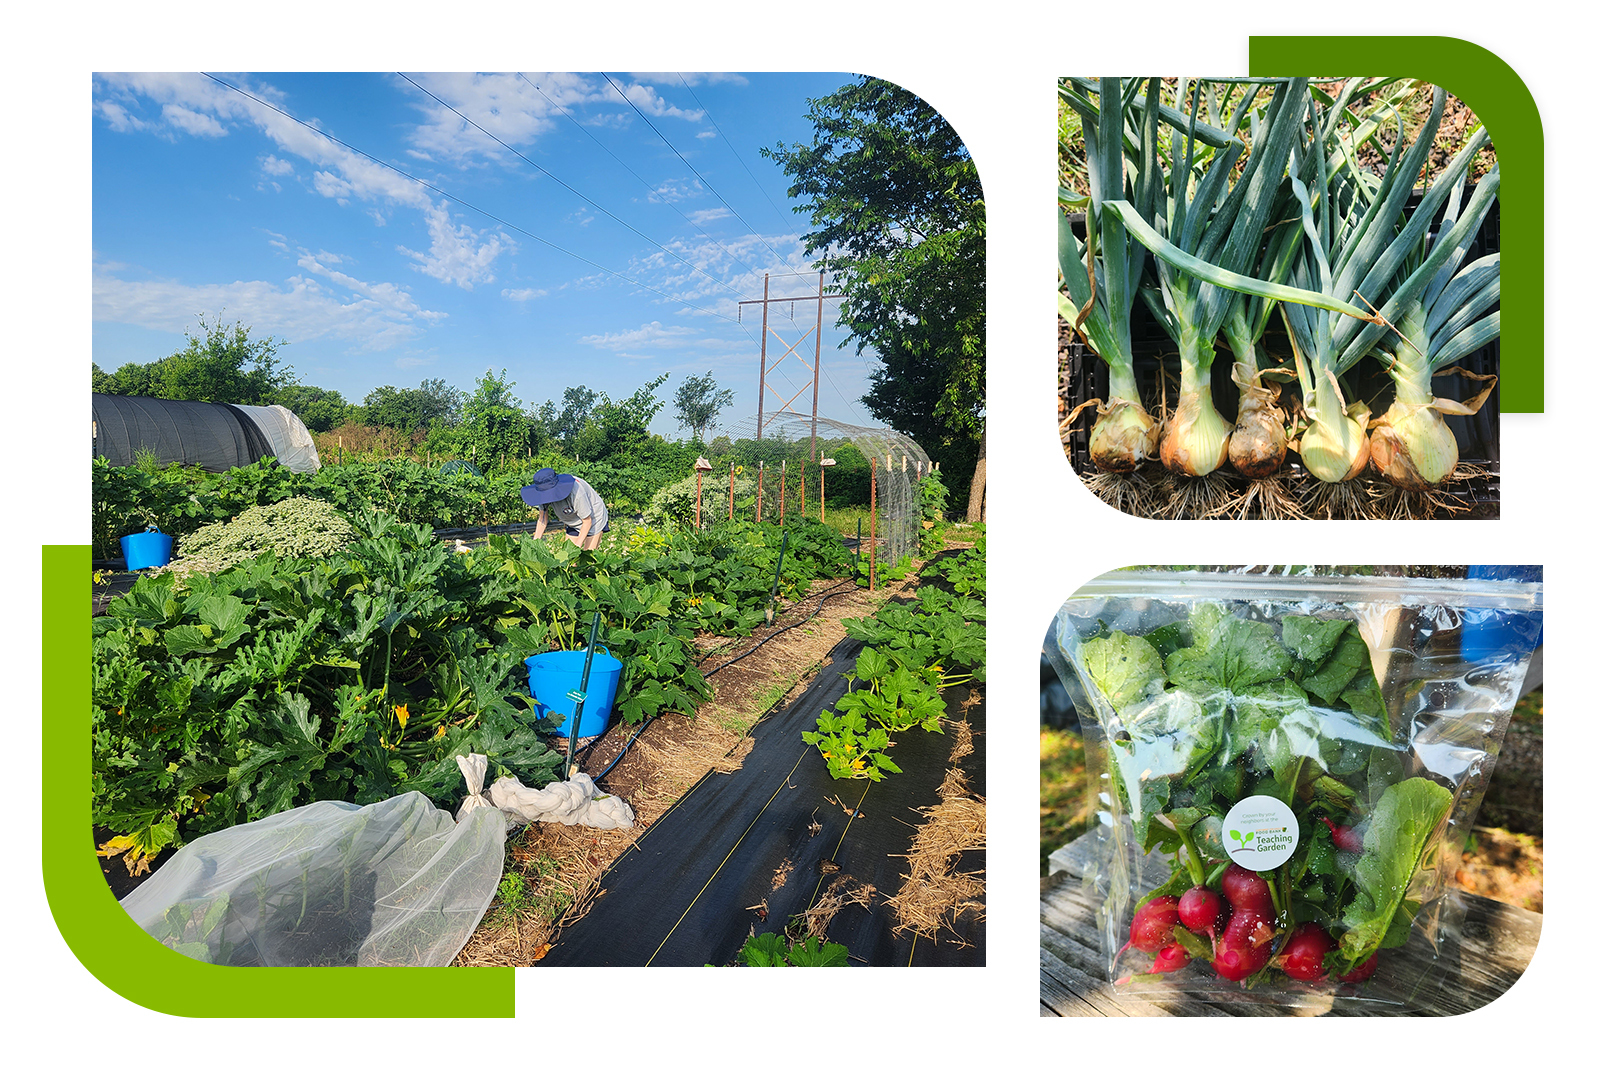 Photo collage of a garden and vegetables. Photo of a person working in a garden with blue skies (left). Photo of vegetables (right).